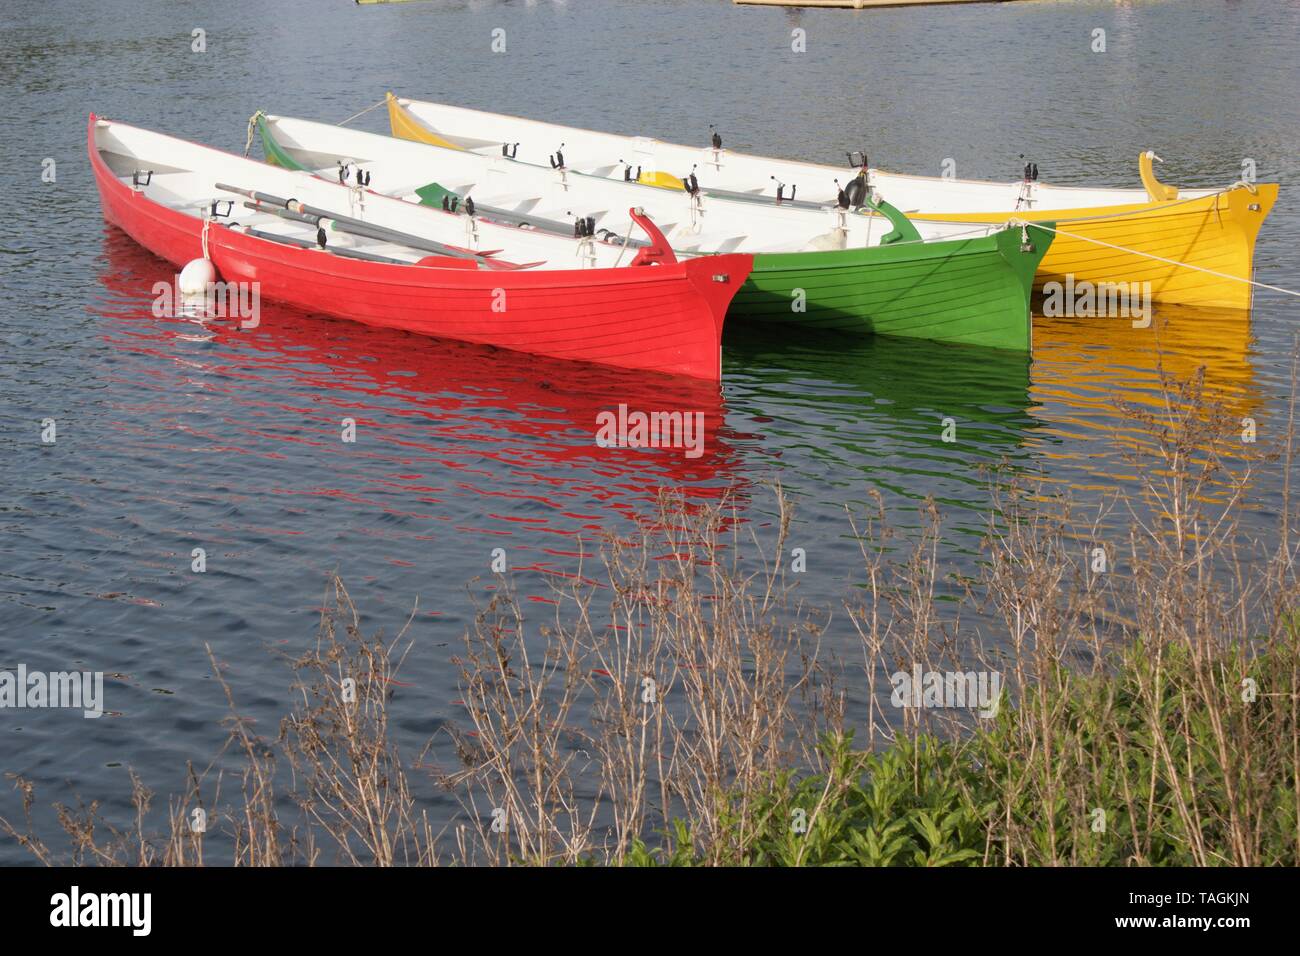 Brightly coloured wooden rowing boats tethered on still water Stock Photo